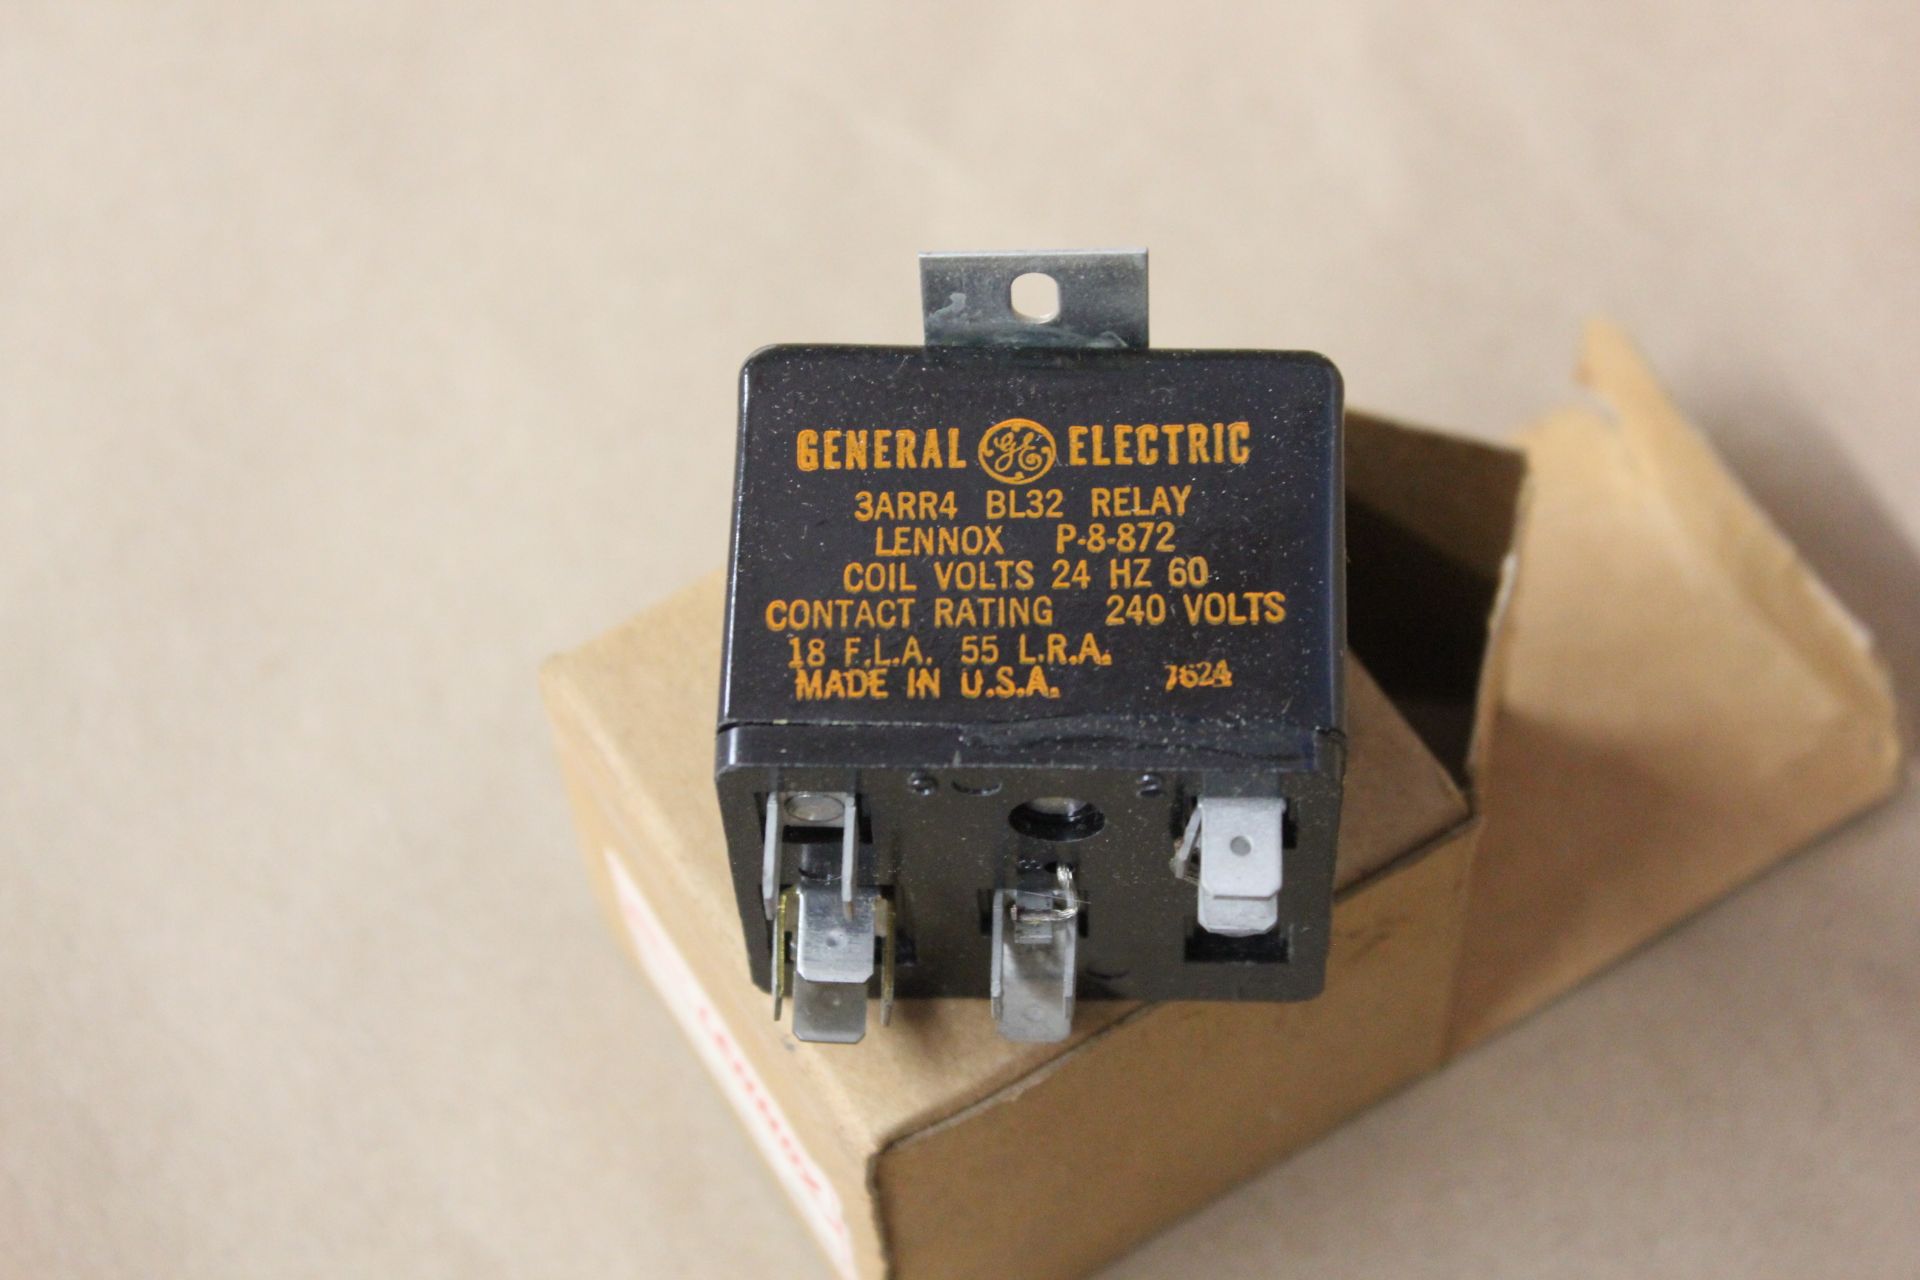 NEW LENNOX/GE MAGNETIC CONTACTOR RELAY 3ARR4BL32 - Image 4 of 5